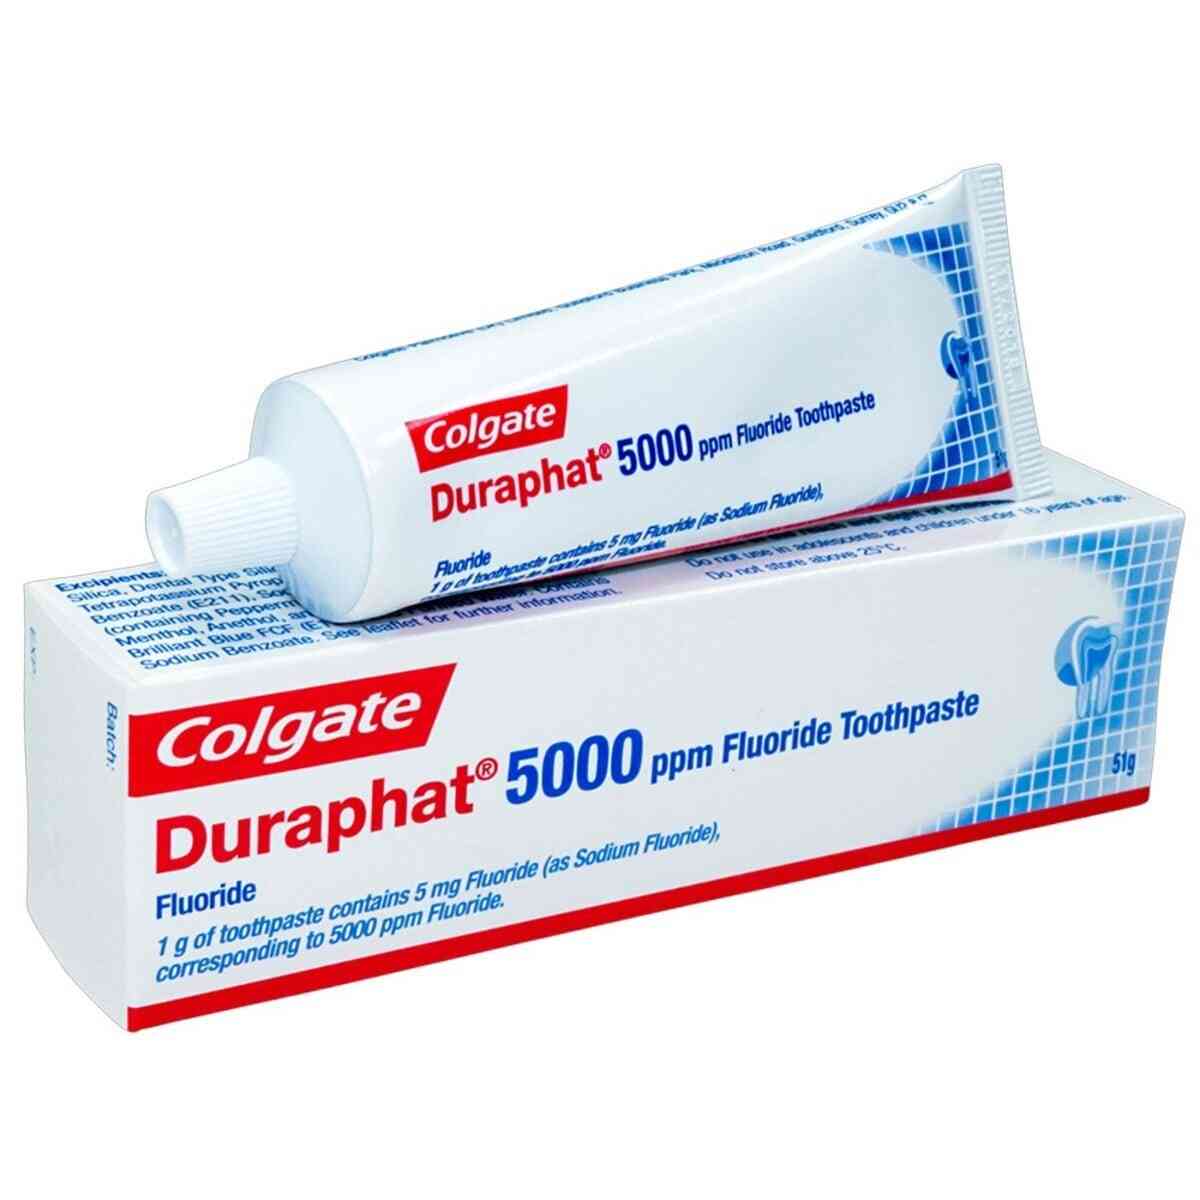 Duraphat ppm Toothpaste Fluoride Toothpaste, 51G - Dock Pharmacy